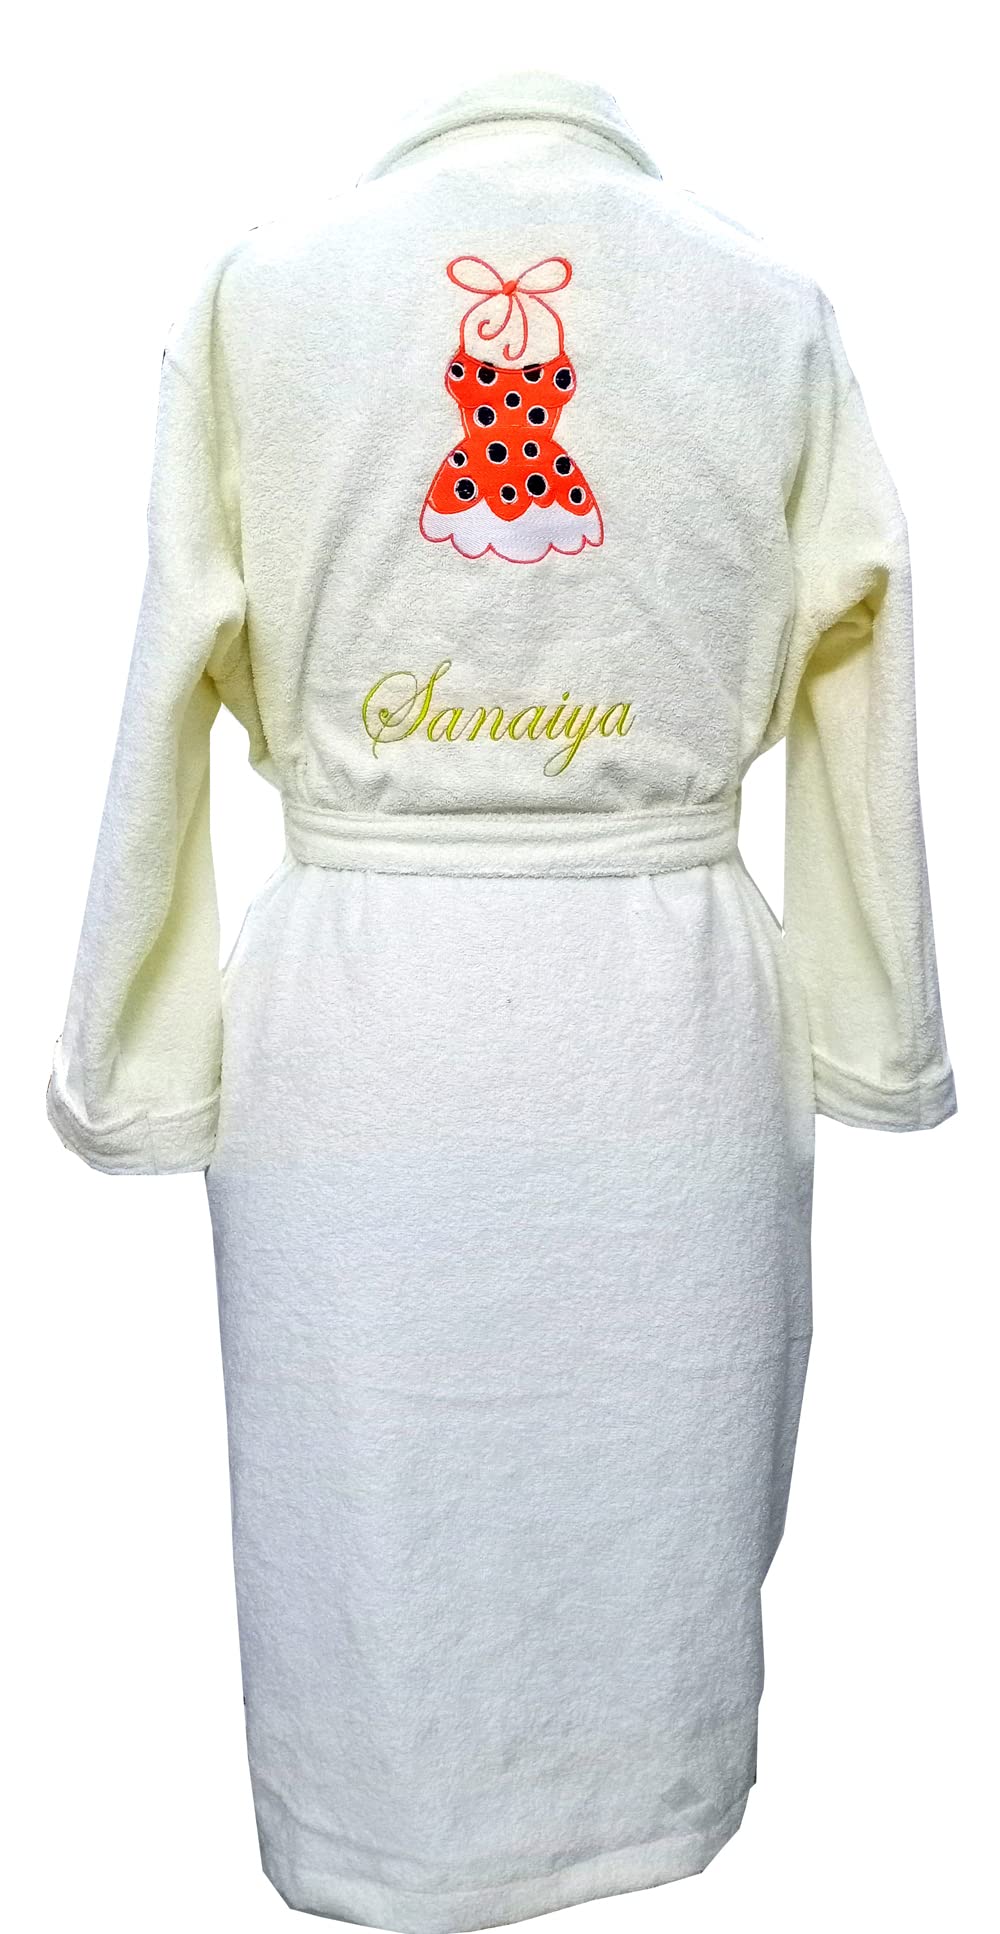 TurtleLittle, Cotton, Personalized Beach Wear Swimsuit Bathrobe for Adults/Women with Name and Initials, 350 GSM (Set of 1, Ivory White)